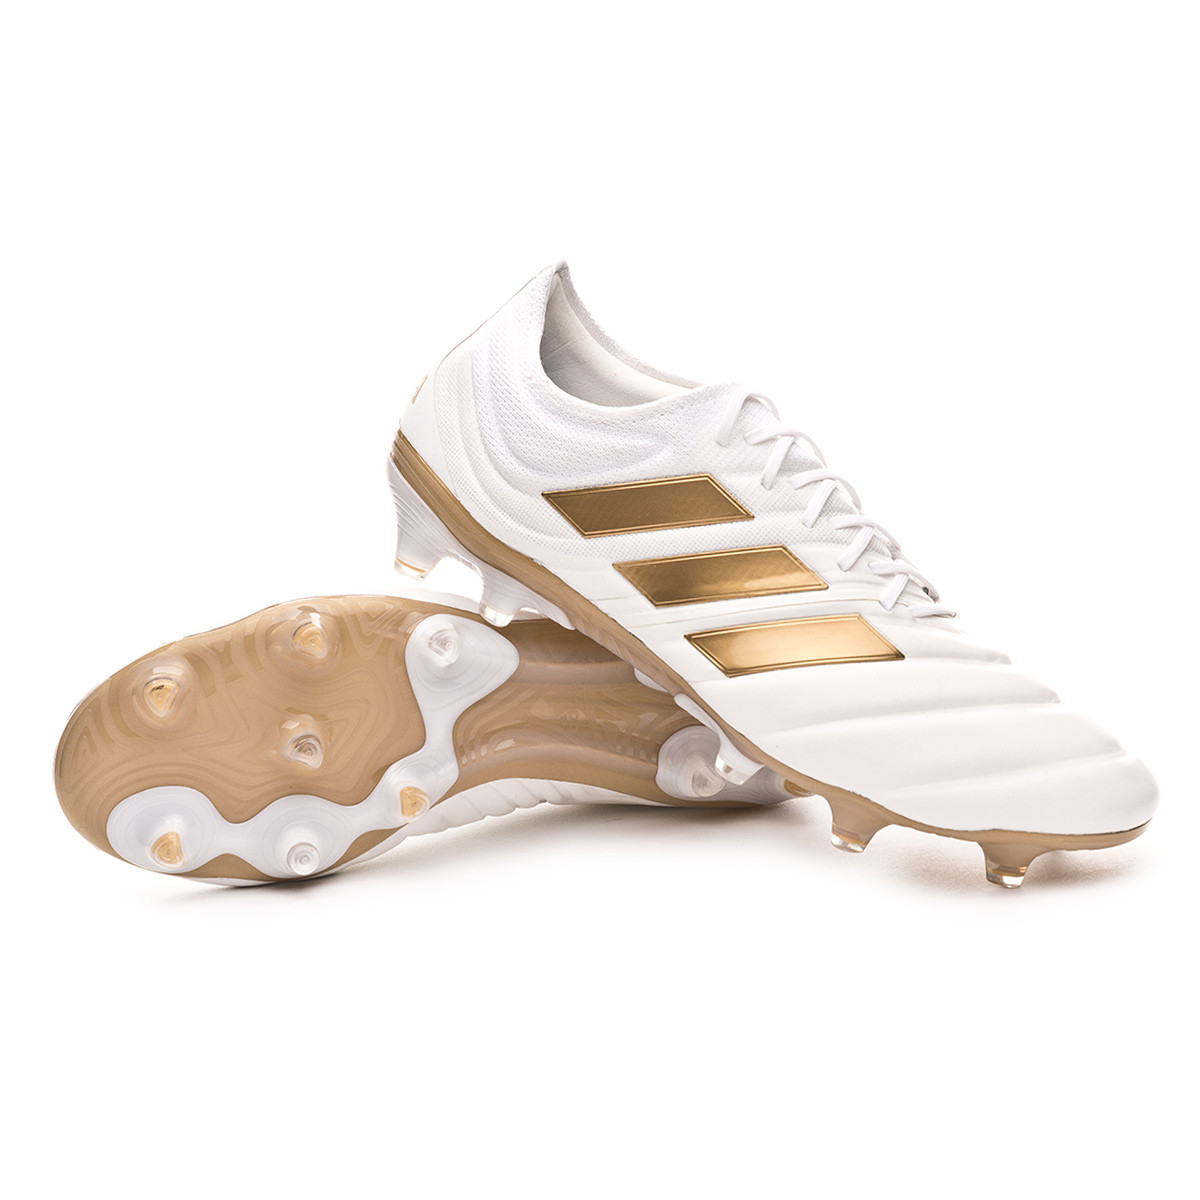 white and gold adidas football boots